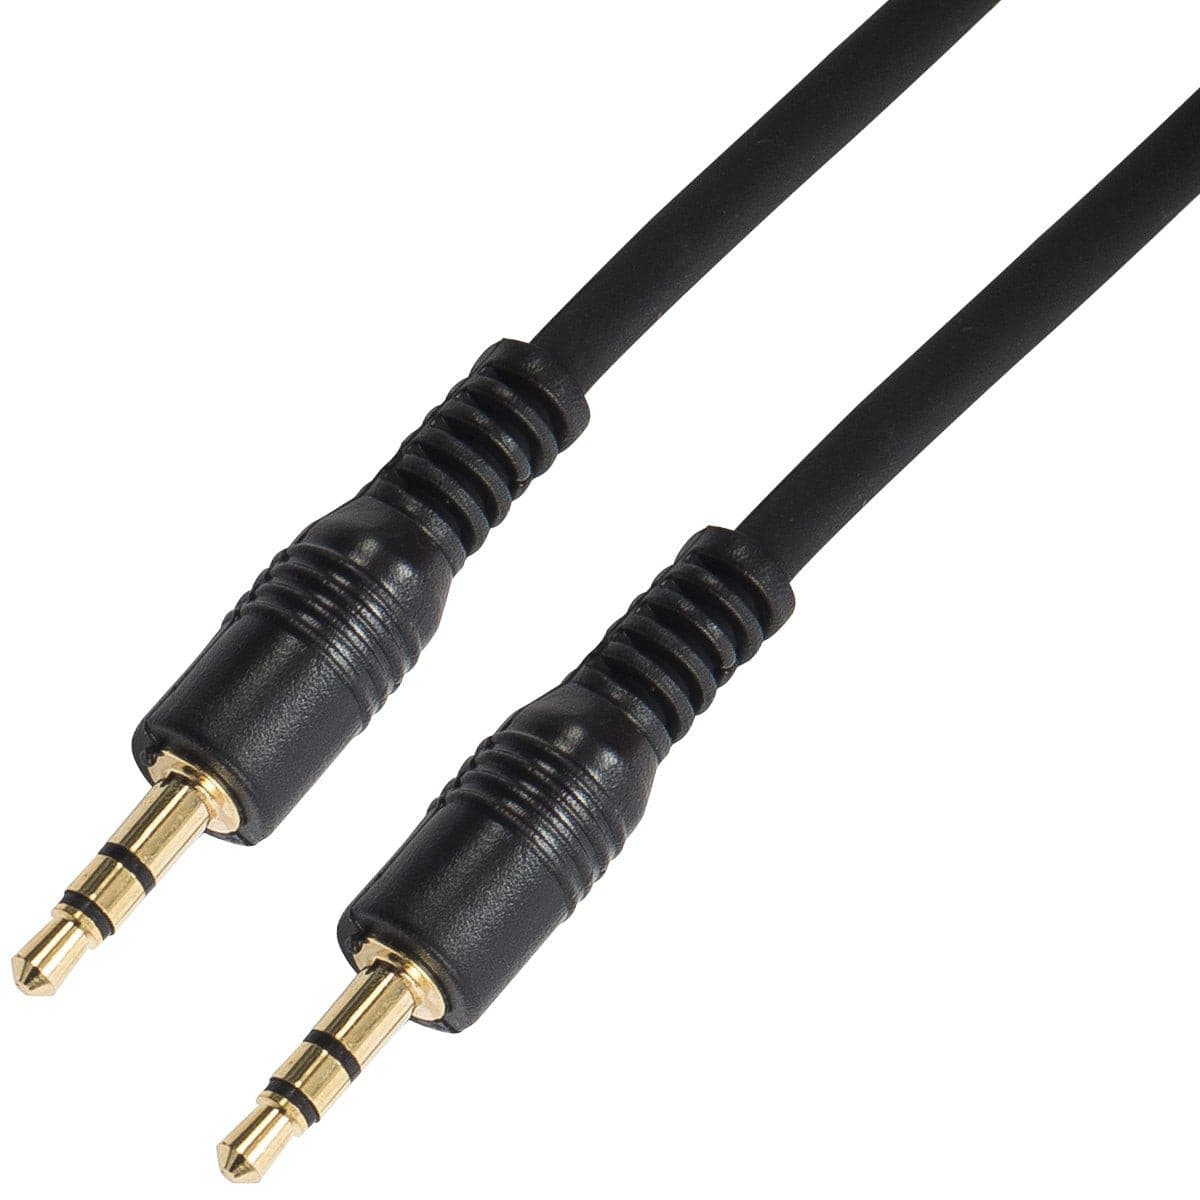 Kinsman Standard Soundcard Cable - 3.5mm Stereo/3.5mm Stereo - 10ft/3m, Cables, Microphones & Headphones for sale at Richards Guitars.